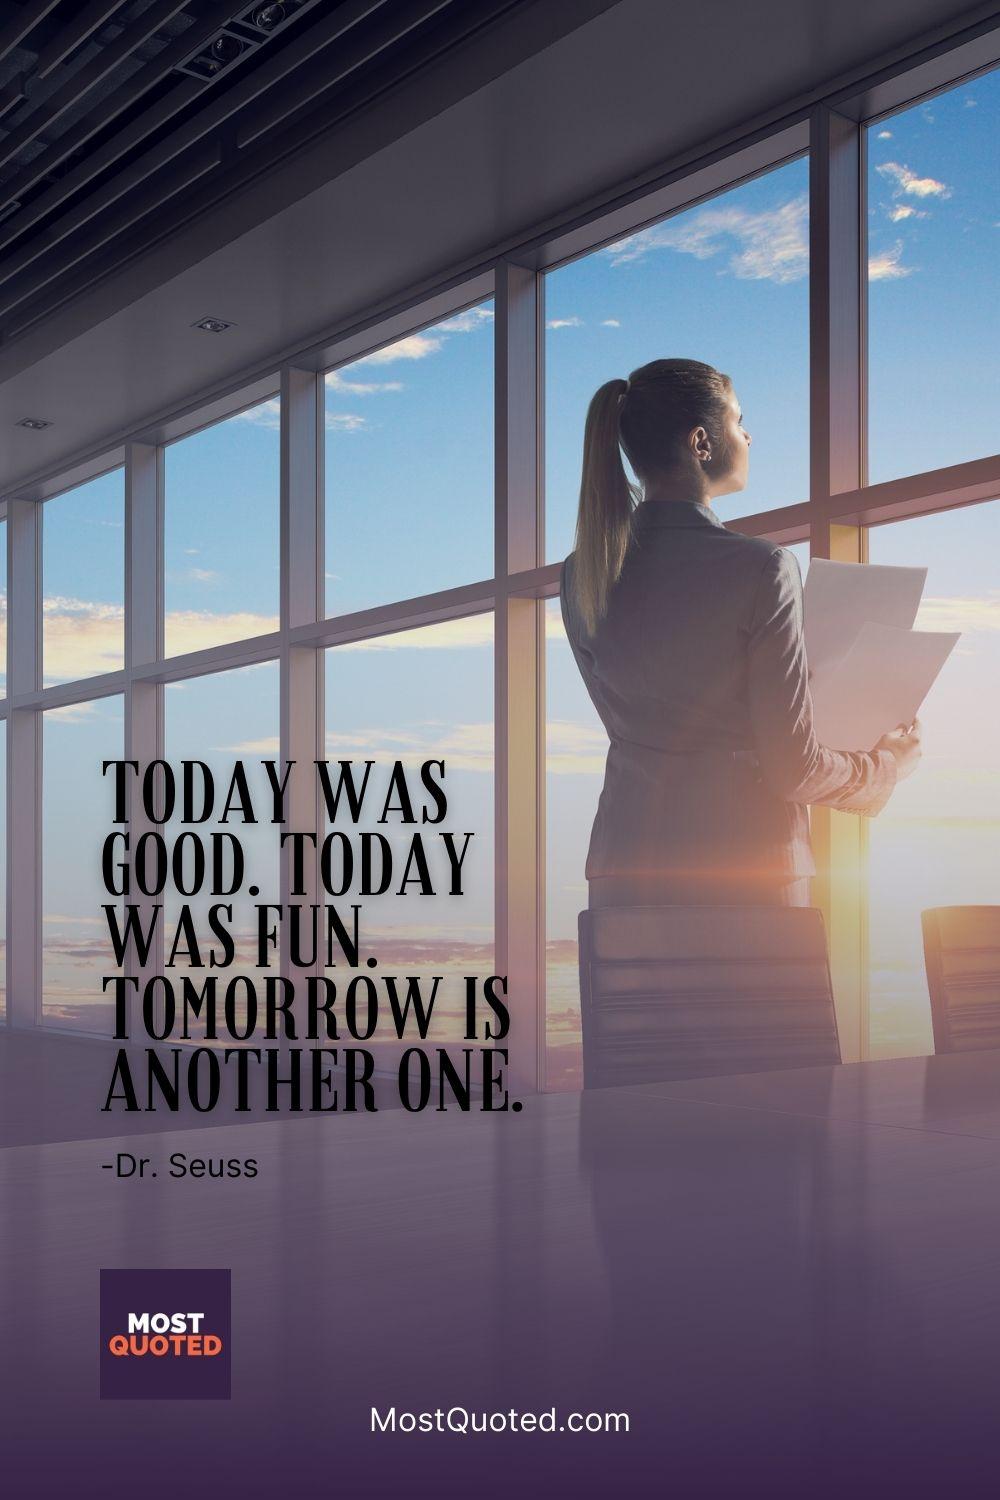 Today was good. Today was fun. Tomorrow is another one. - Dr. Seuss